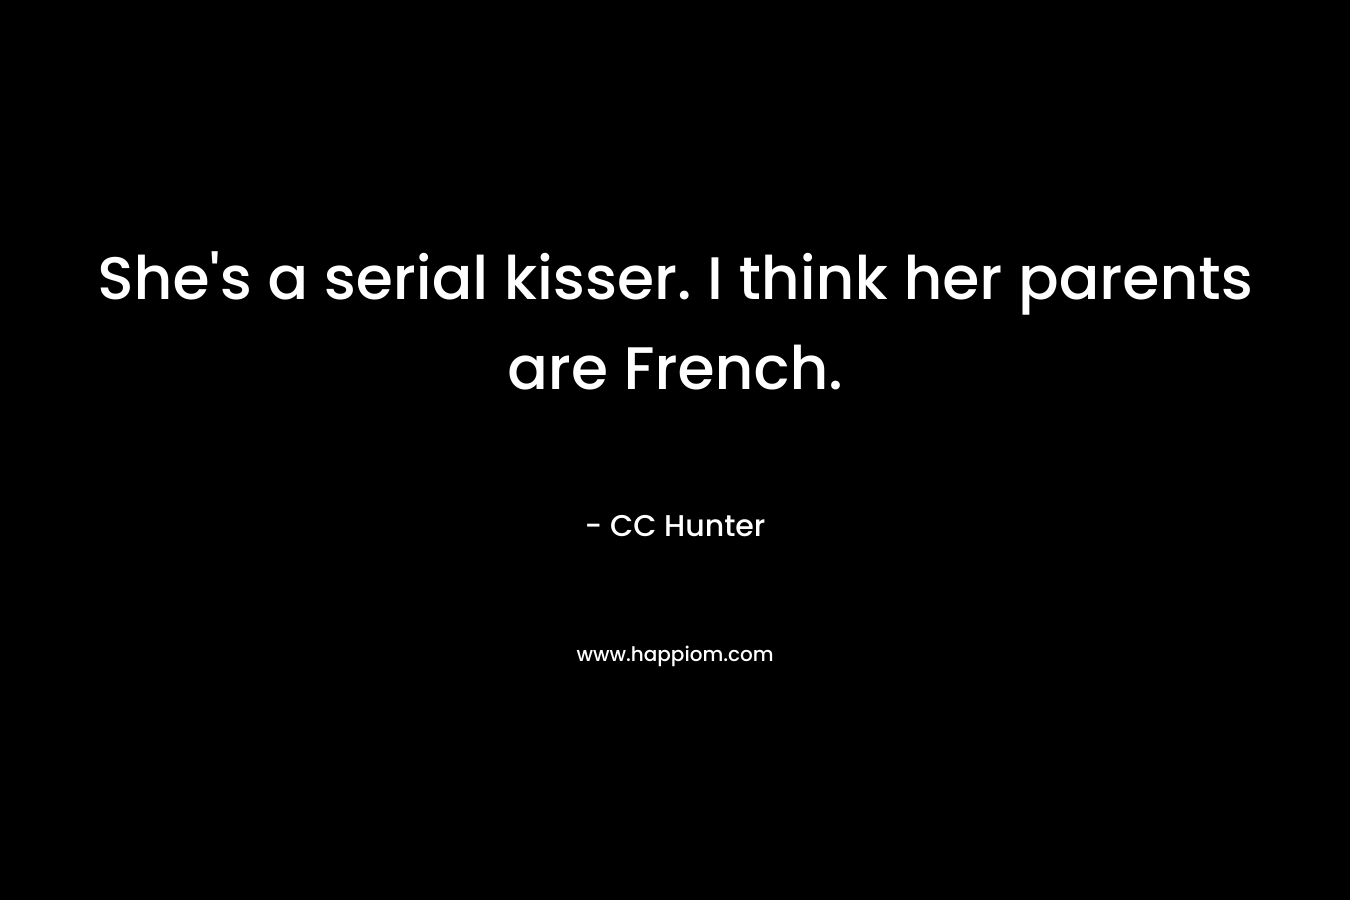 She's a serial kisser. I think her parents are French.